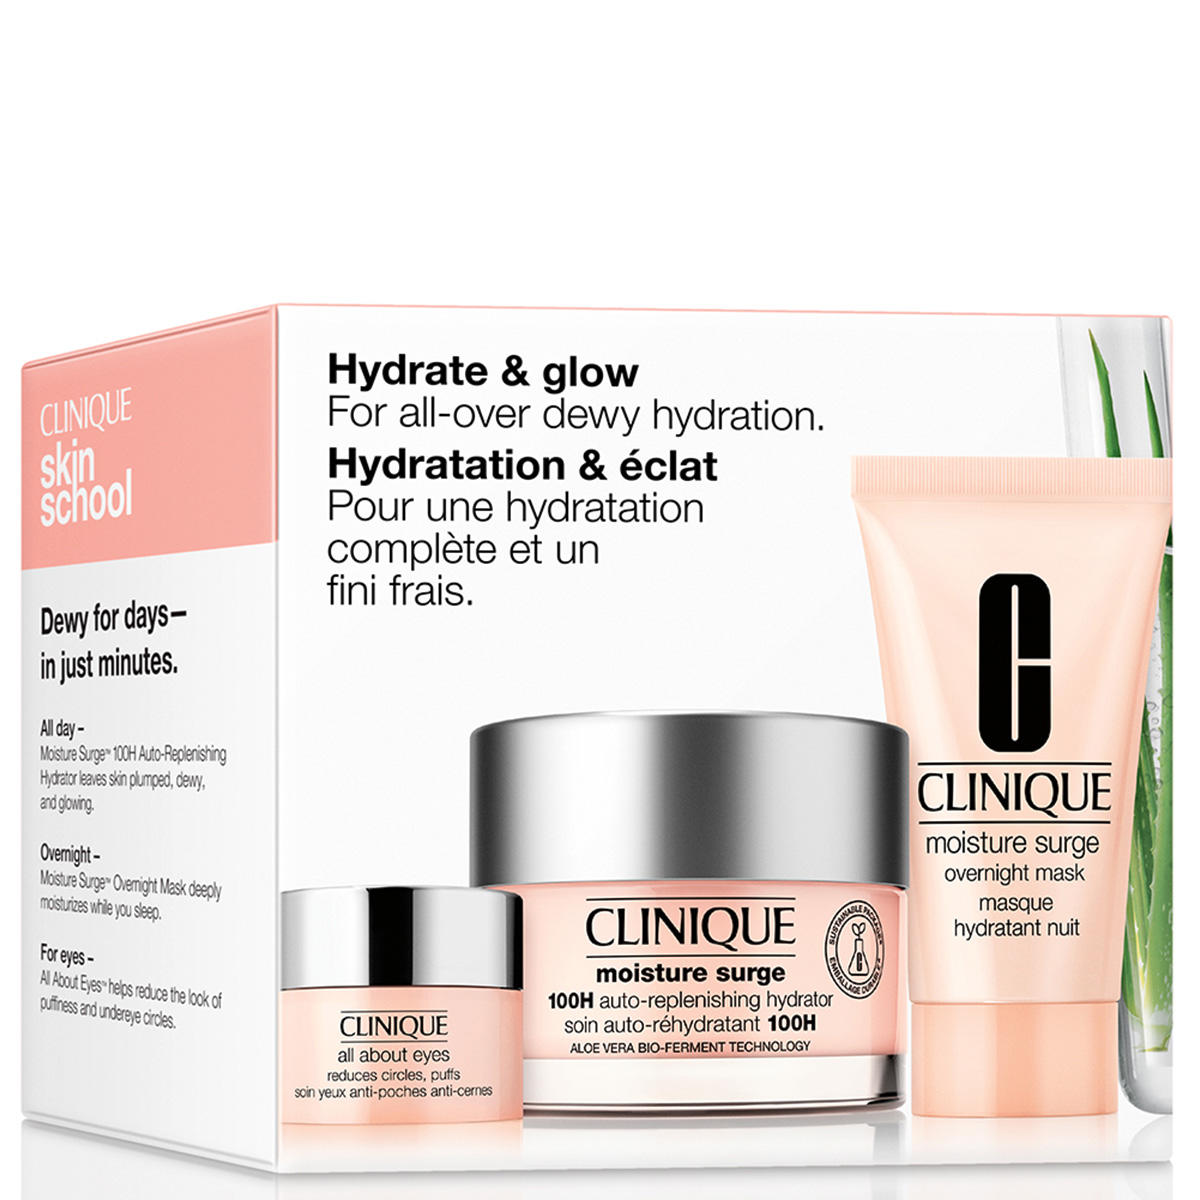 Clinique Hydrate & Glow Set  - 2